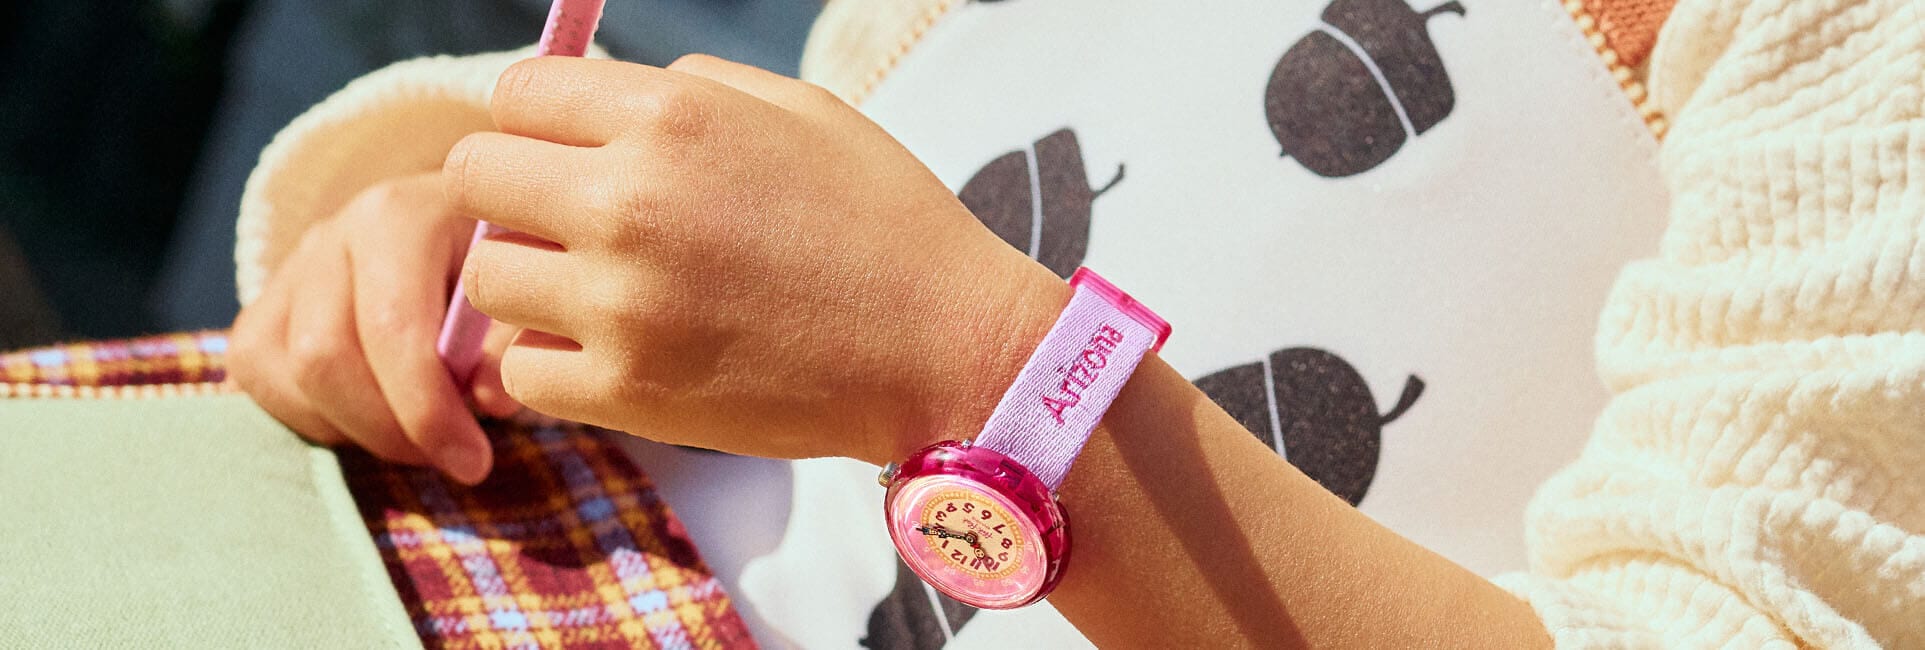 Flik Flak personalized watches for girls